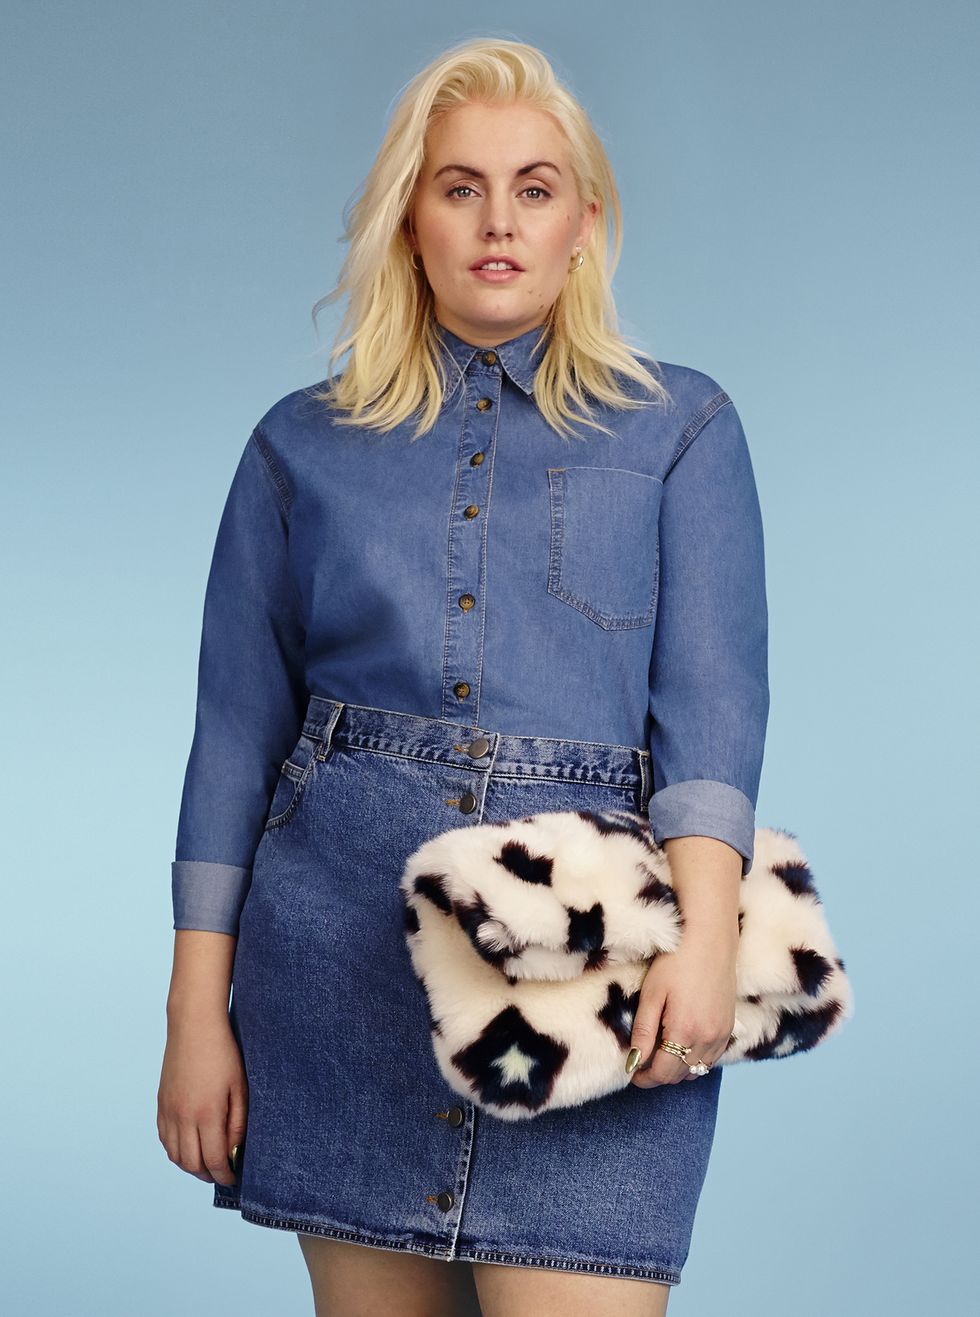 Felicity Hayward modelling the SS15 ASOS Curve Collection